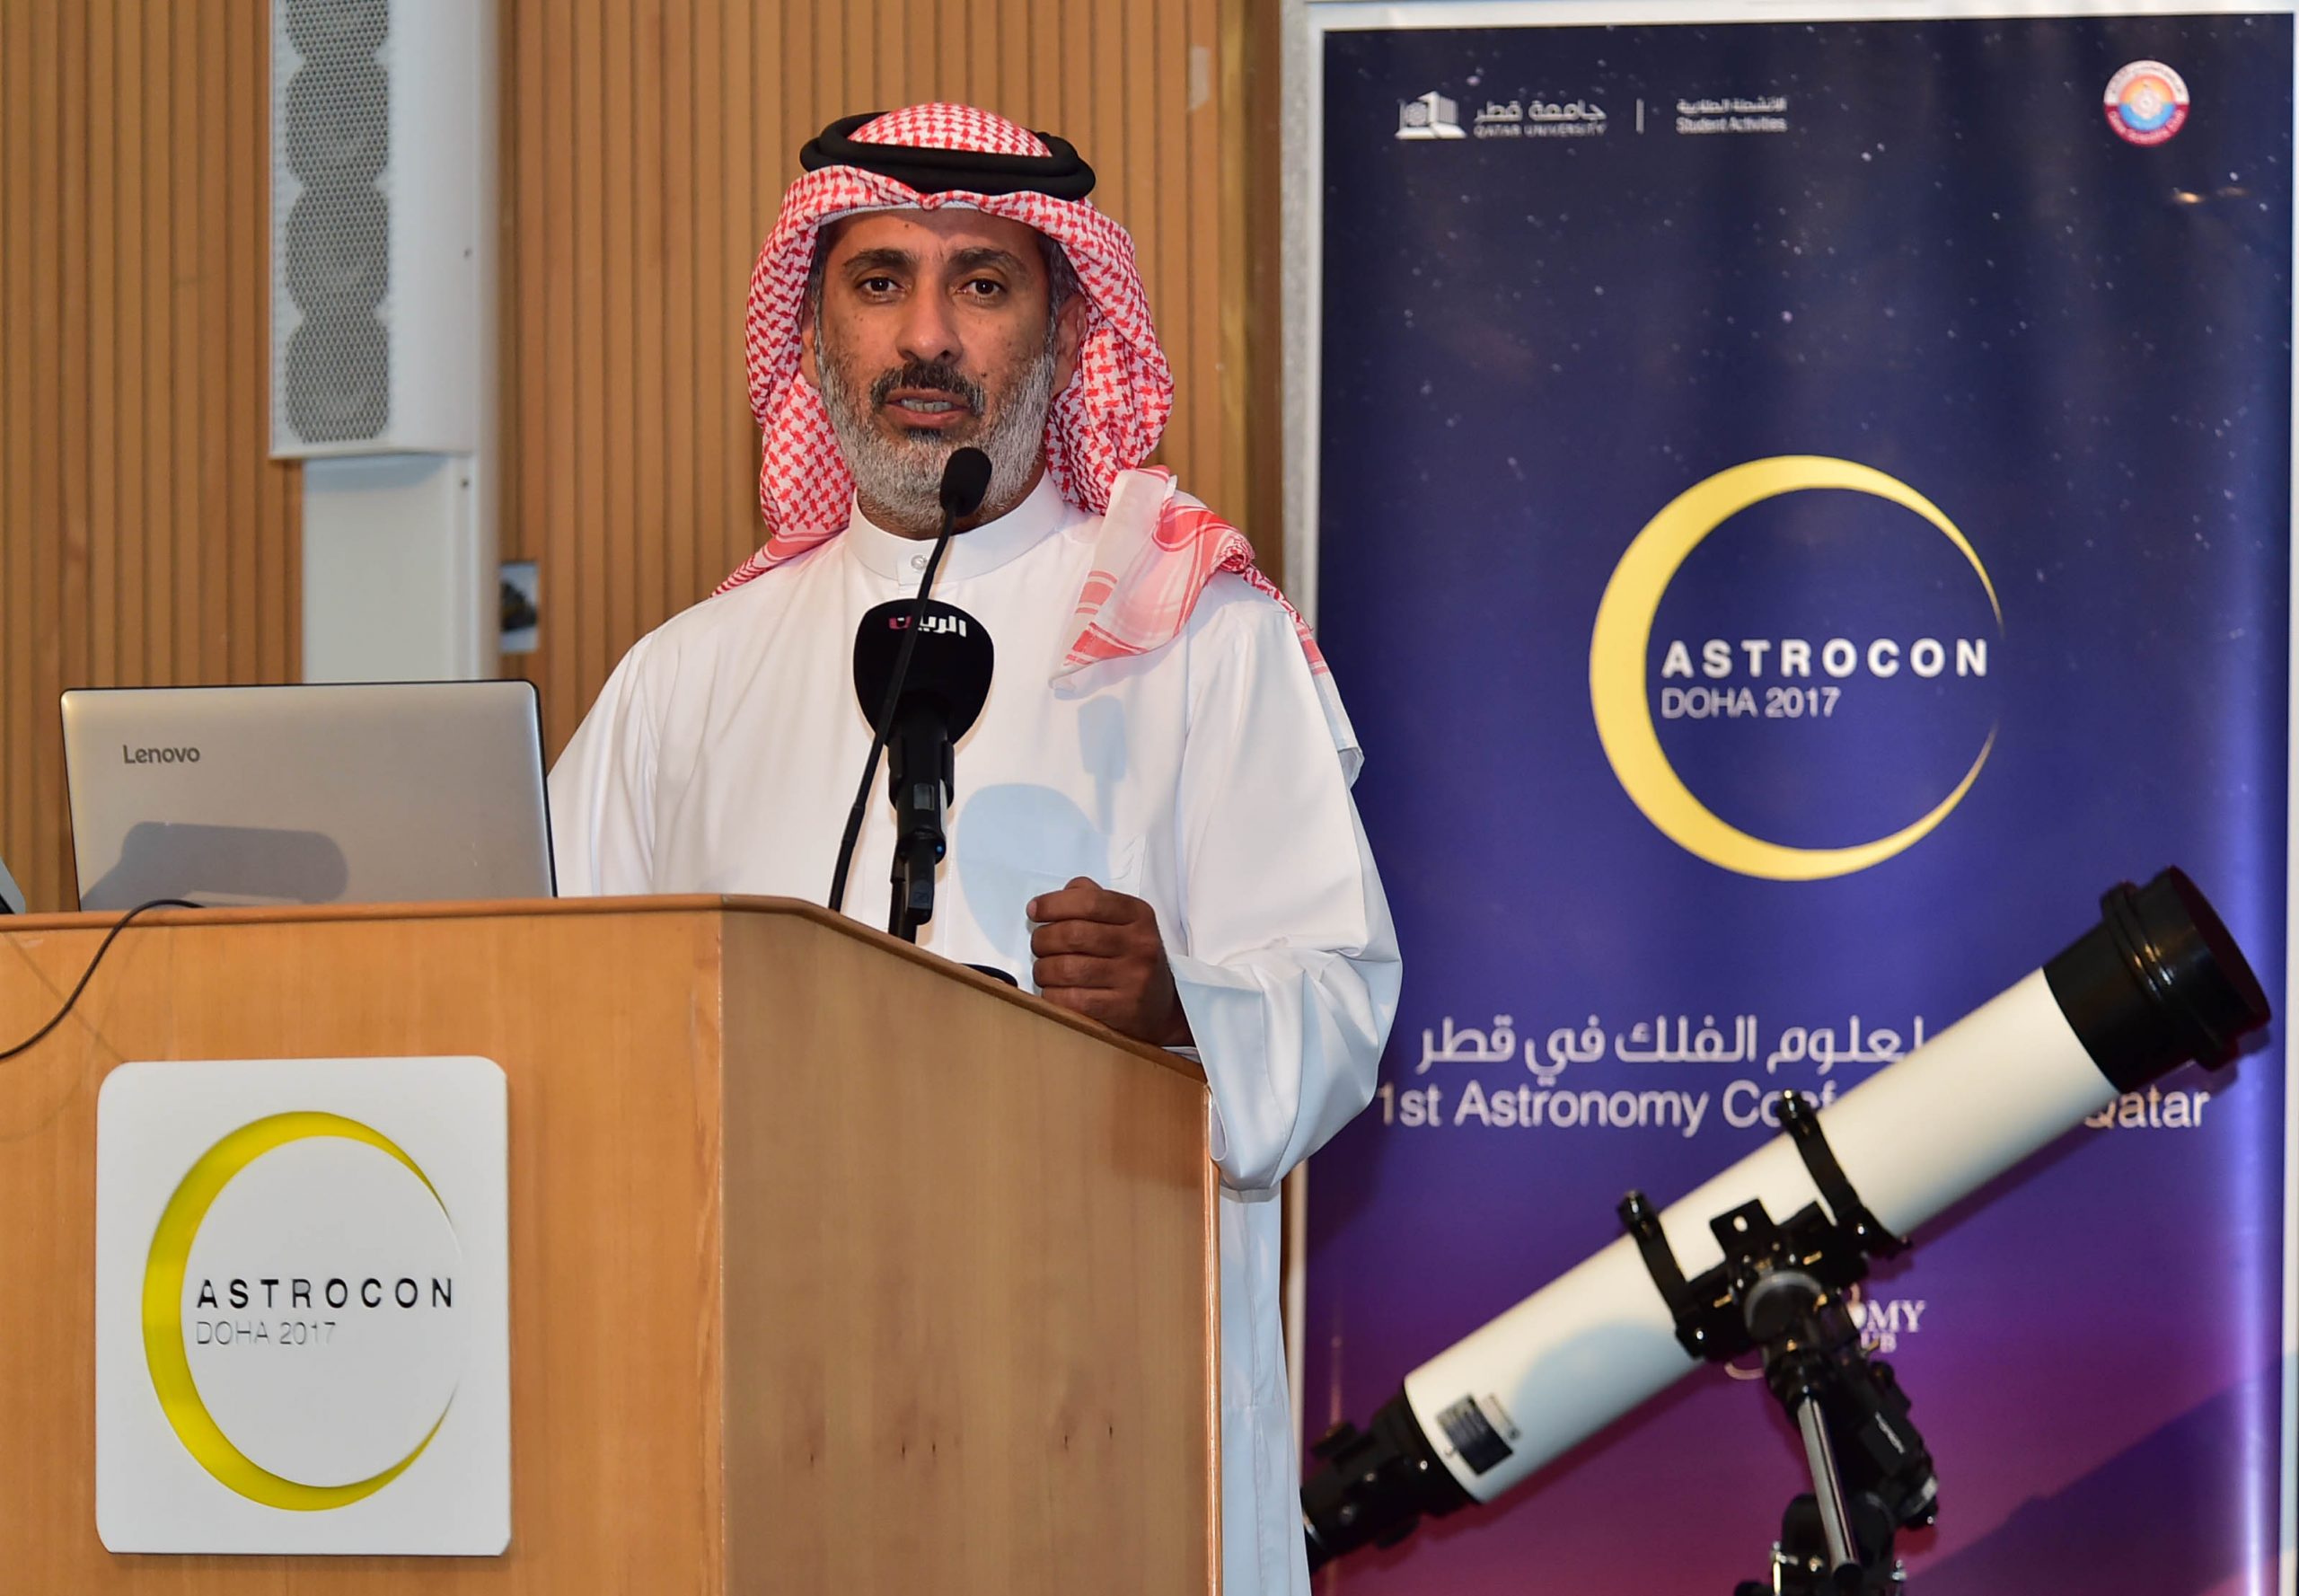 Zodiac signs and their attributes are “nonsense”: Head of Qatar Astronomical Center